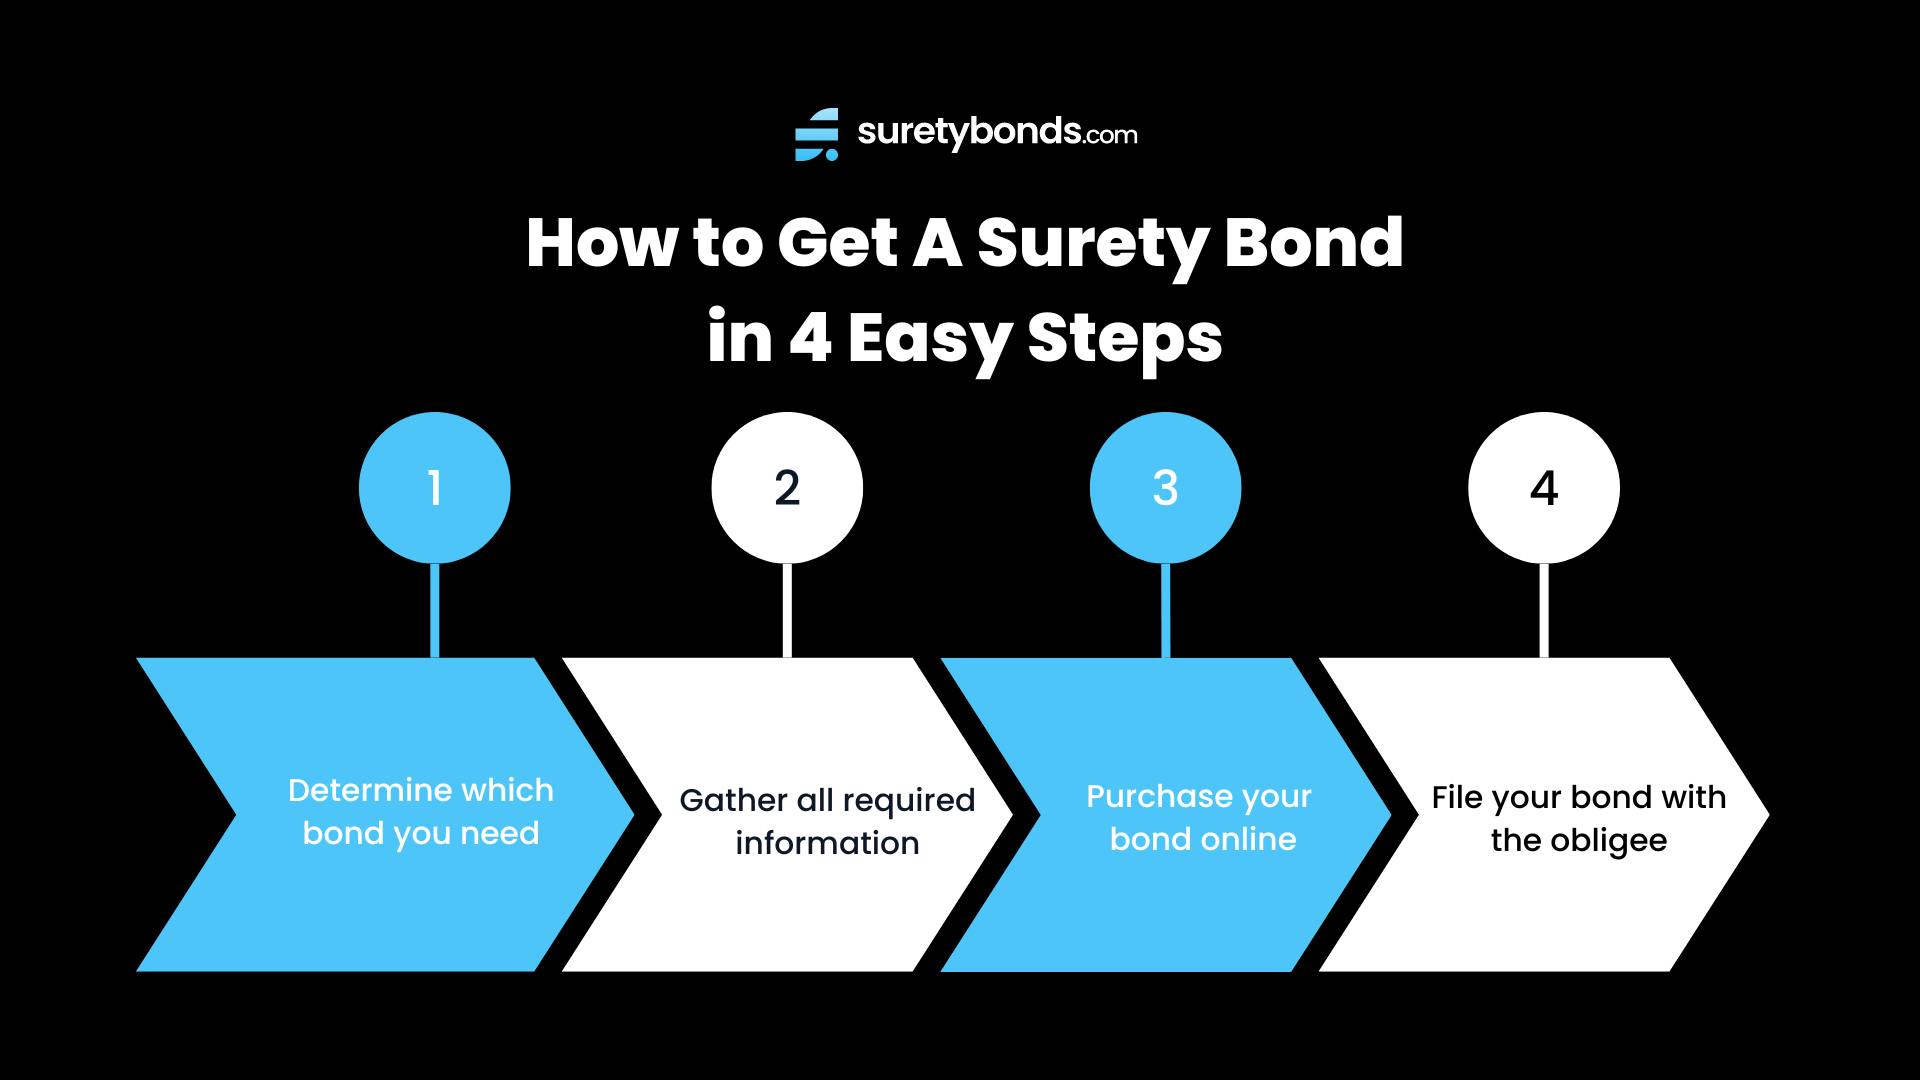 How to get a surety bond in 4 steps infographic